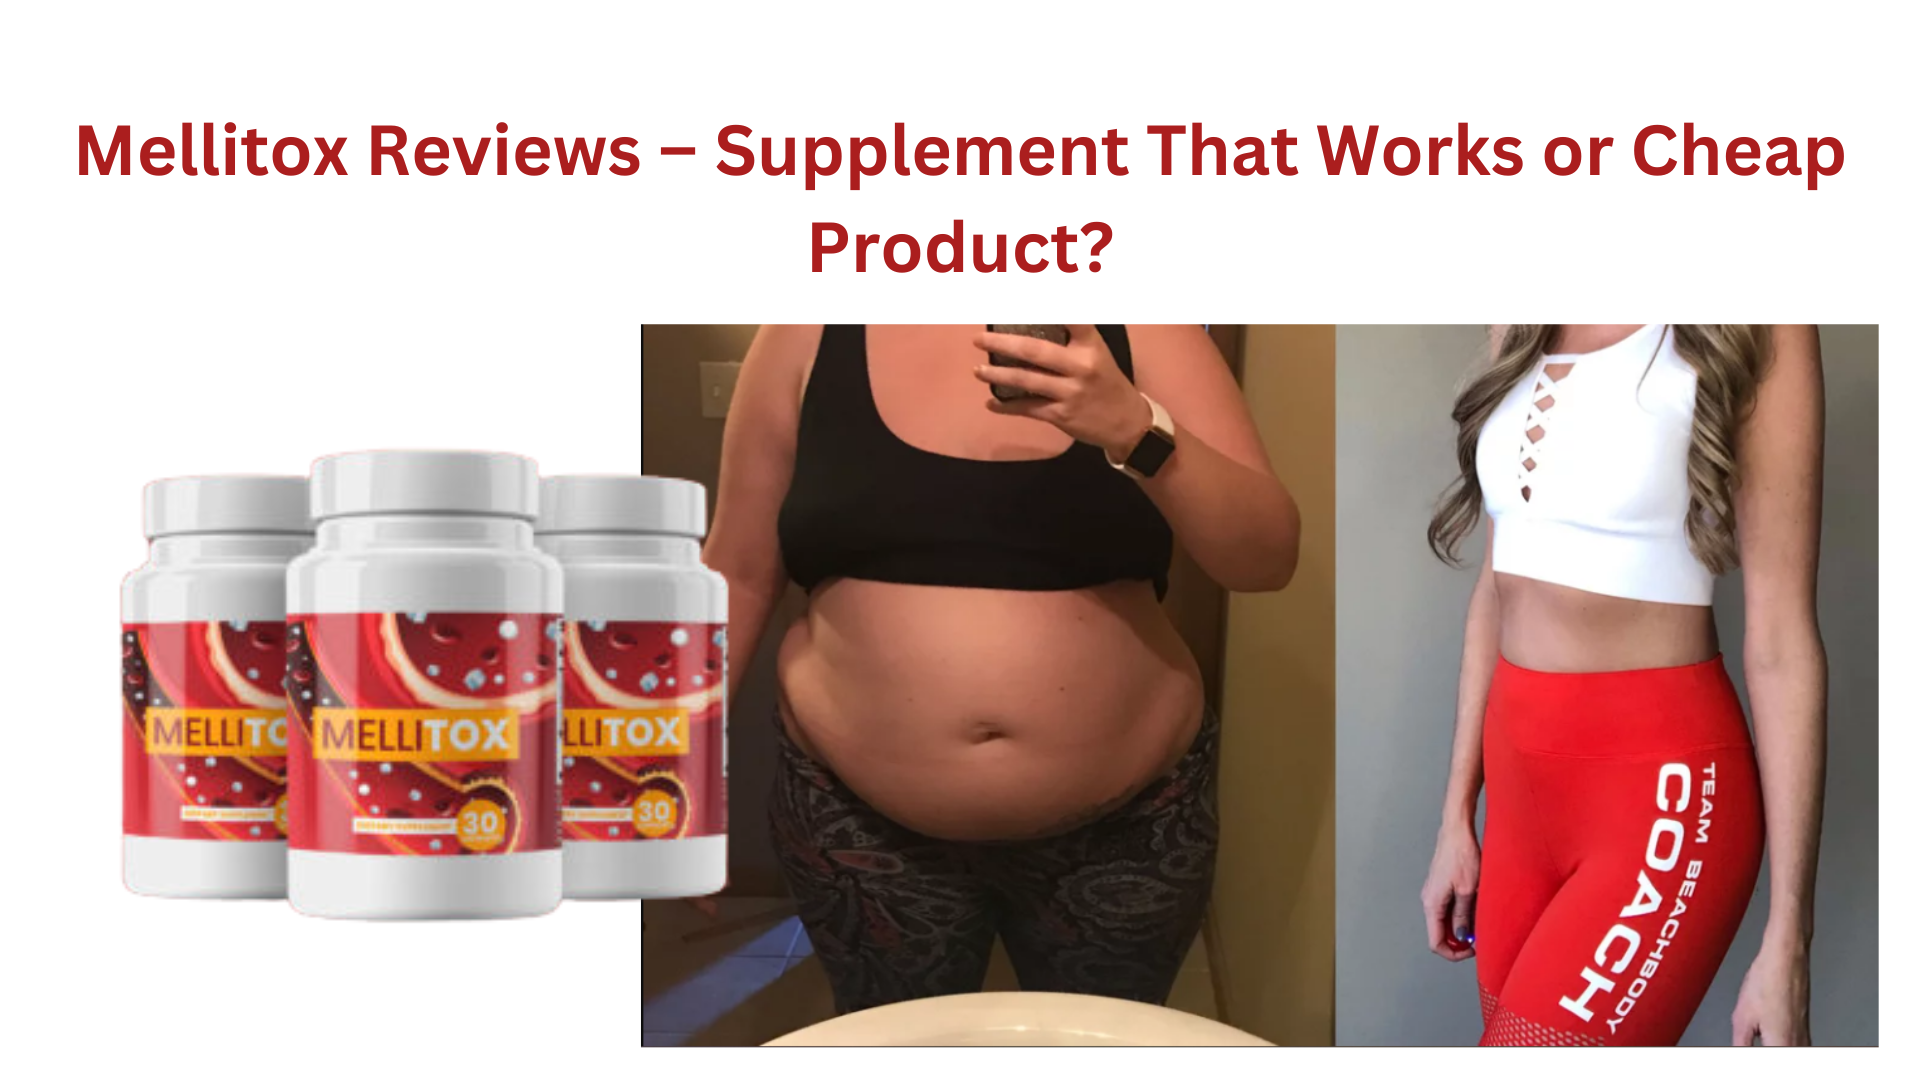 Mellitox Reviews – Supplement That Works or Cheap Product